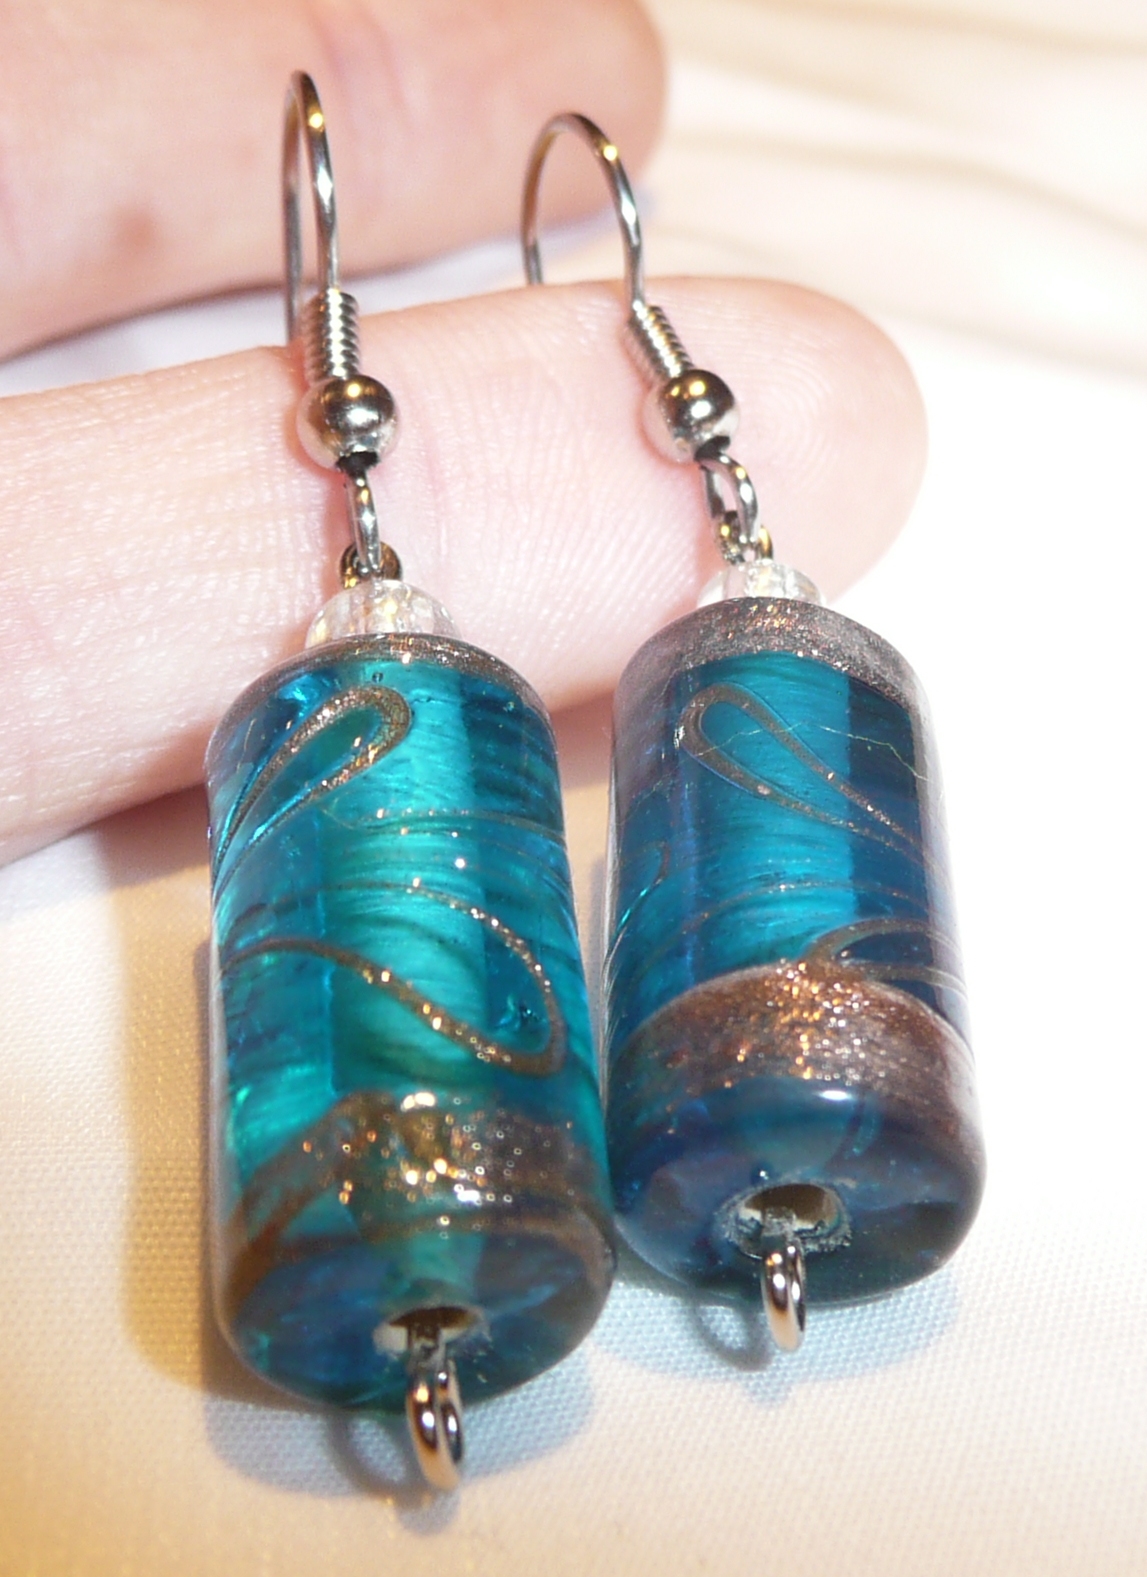 Earrings – the newest addition to Epheriell Designs